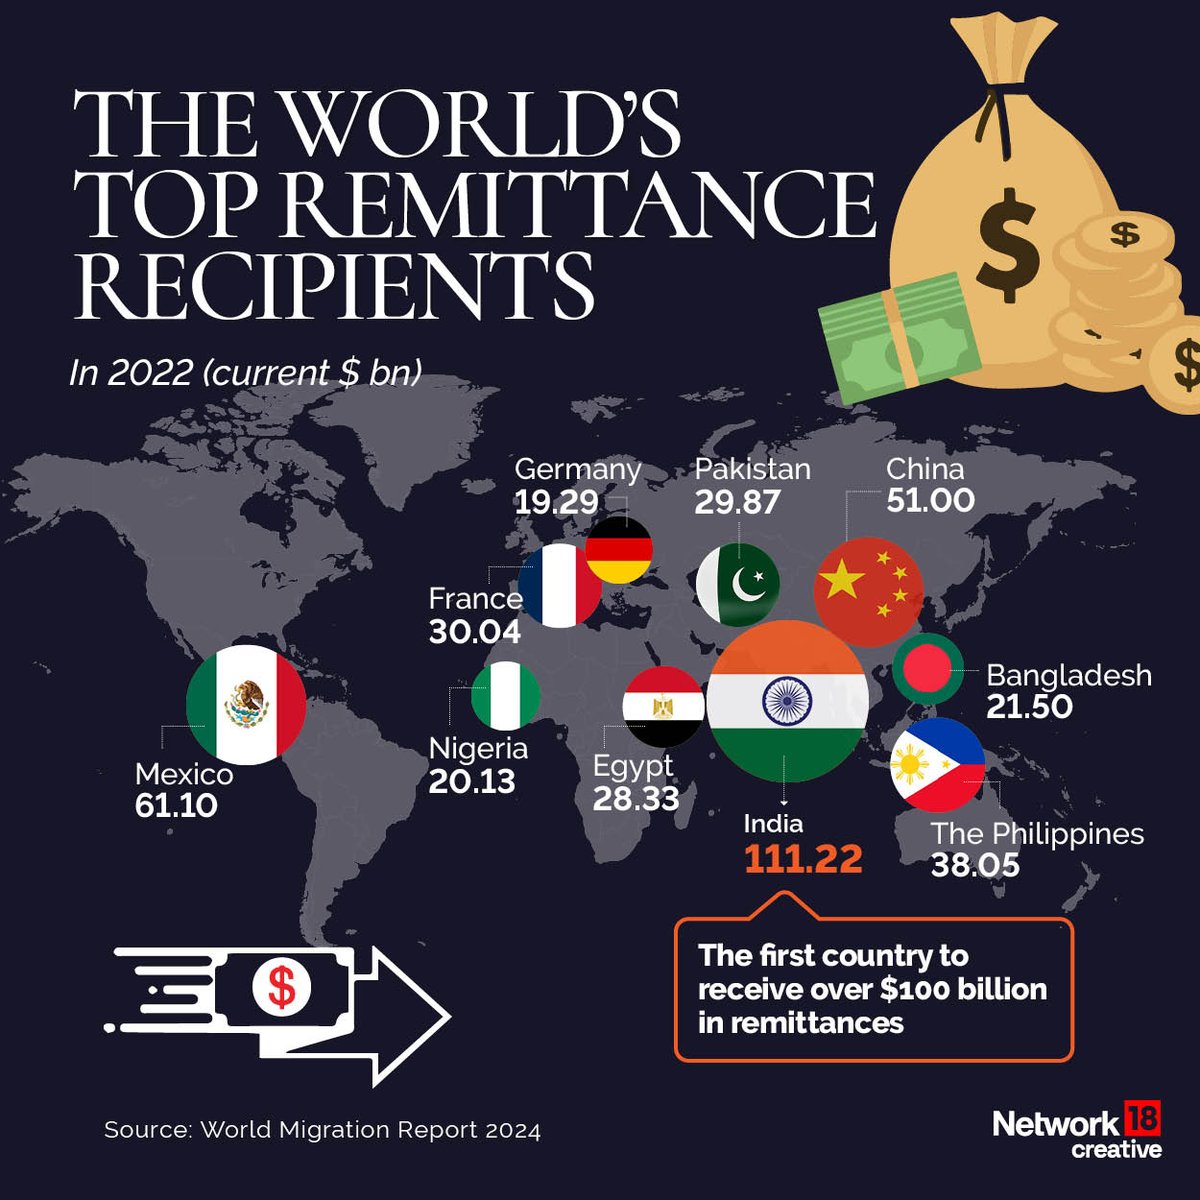 India received over $111 billion in remittances in 2022, becoming the first country to reach and even surpass the $100 billion mark. 

A look at the world’s top remittance recipients. | #FPCreative